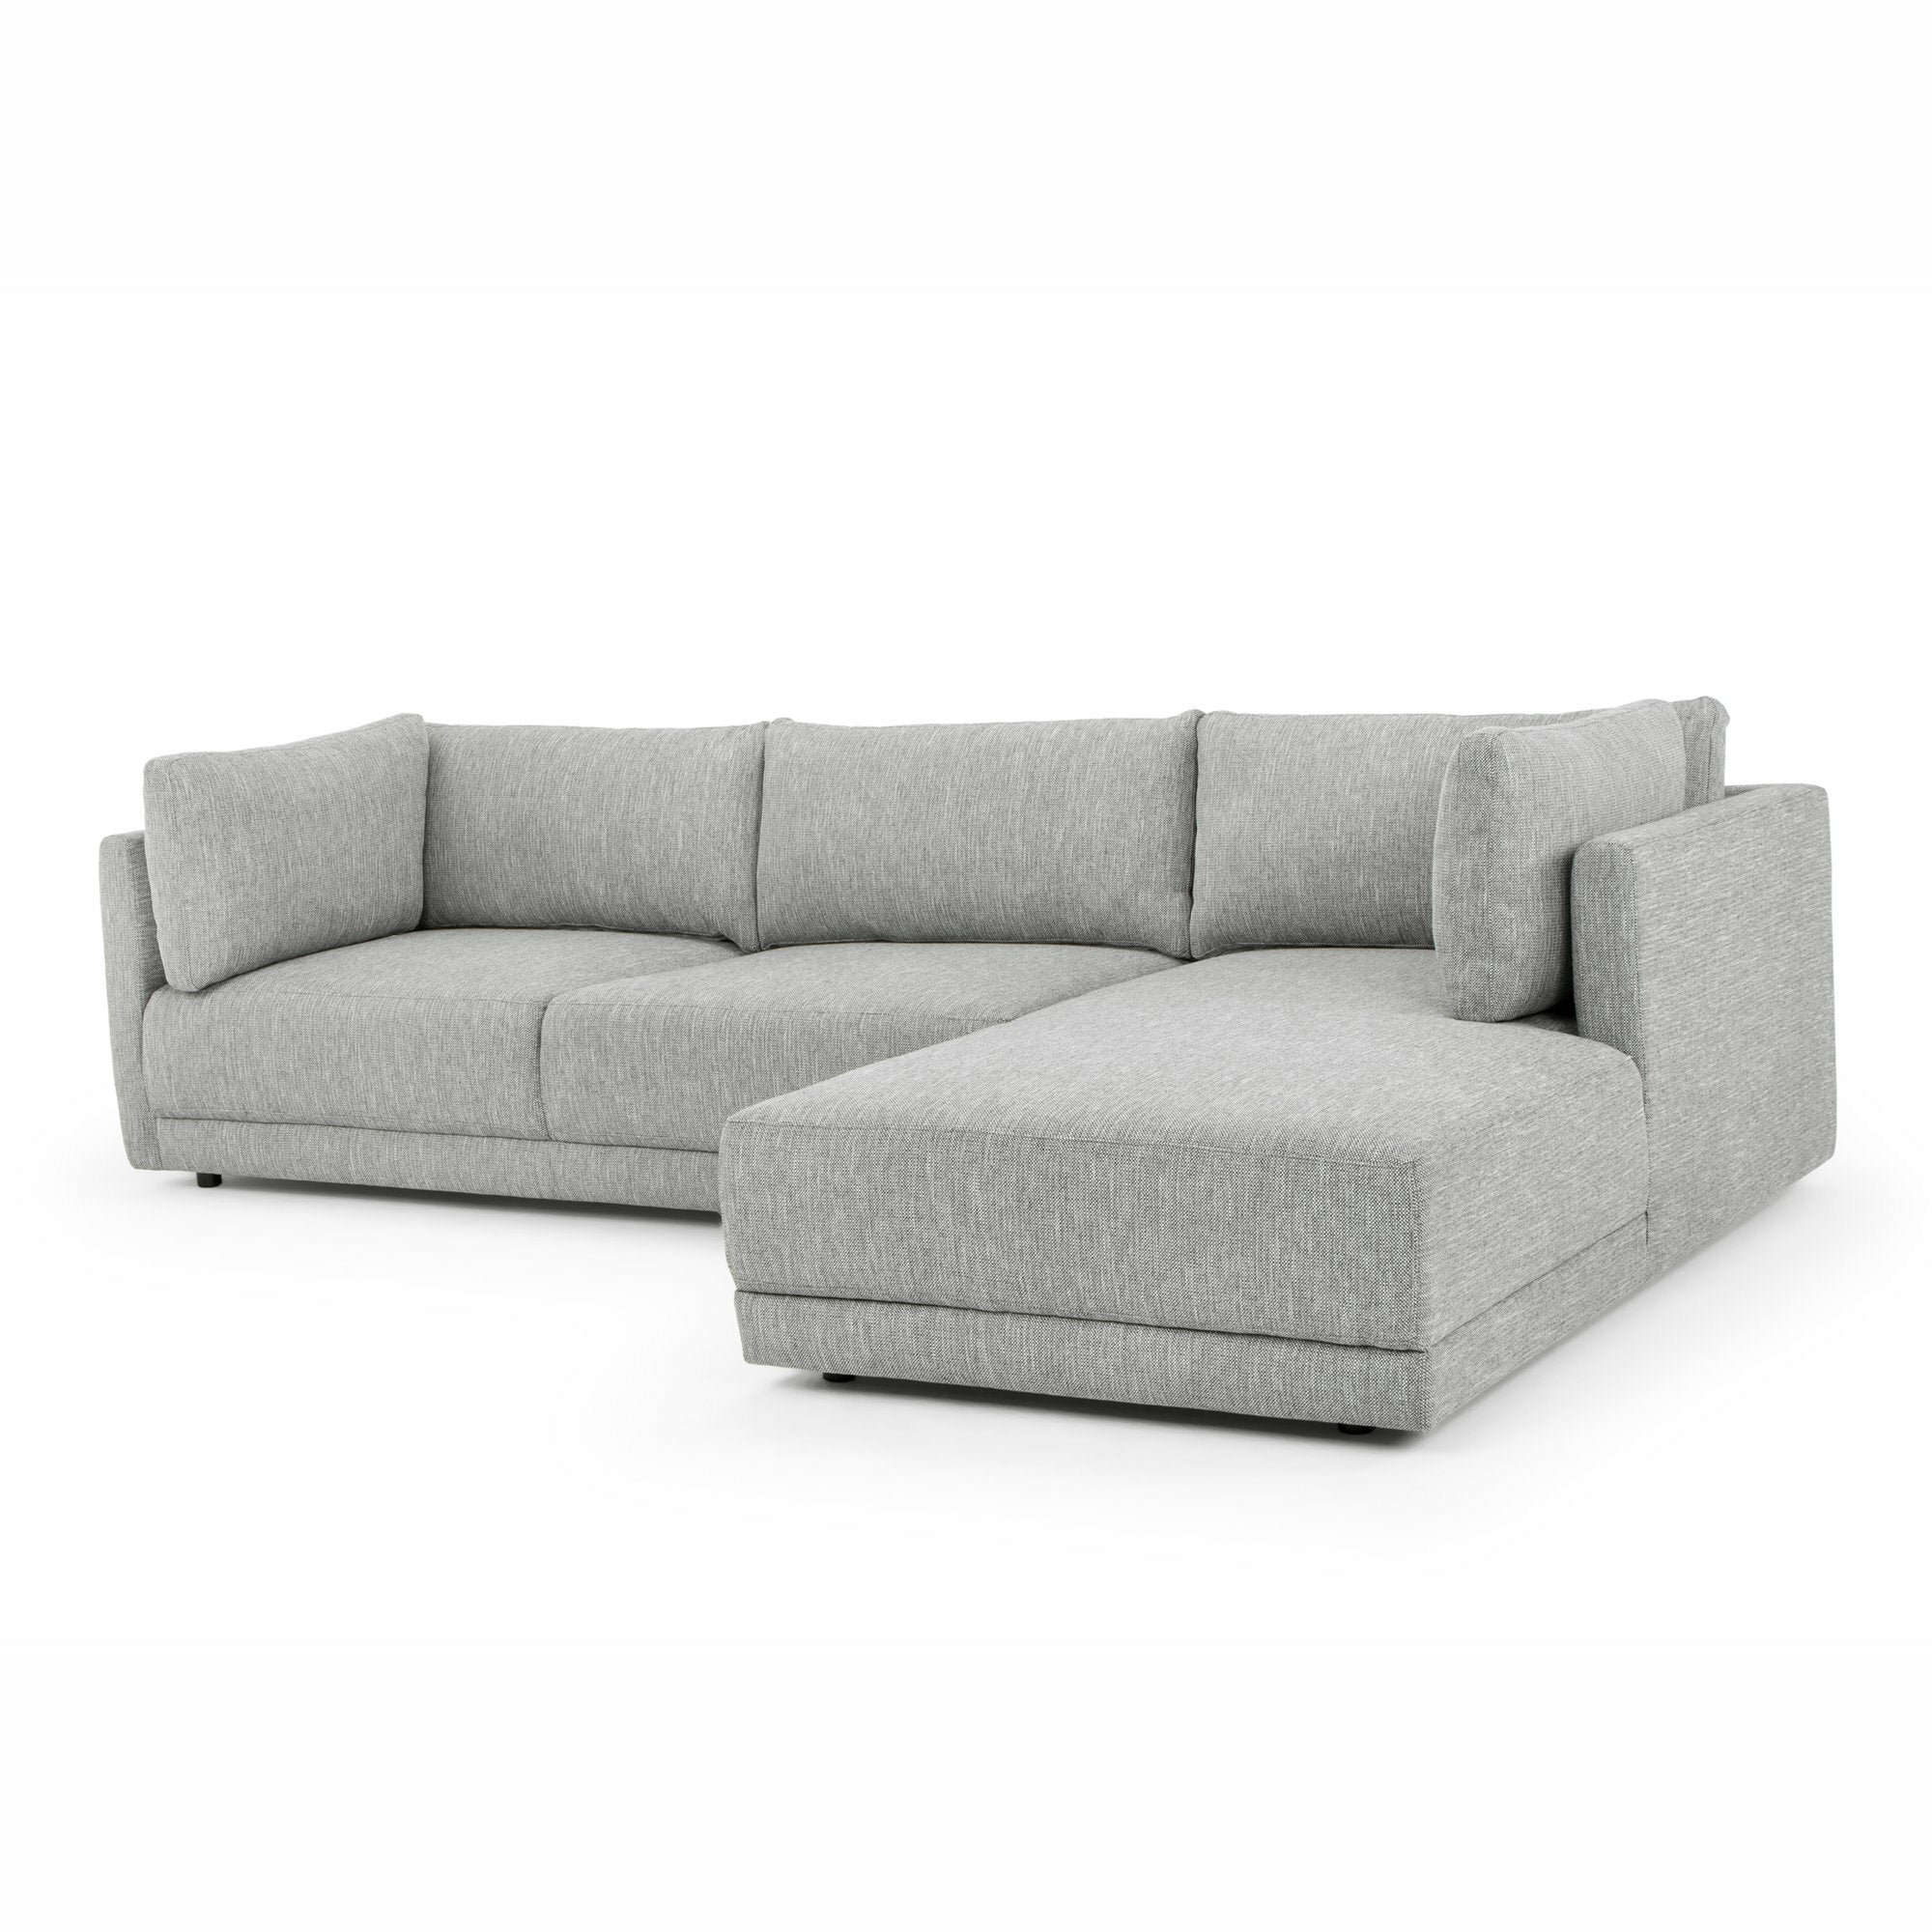 Kerry 3 Seater Right Chaise Fabric Sofa - Graphite Grey